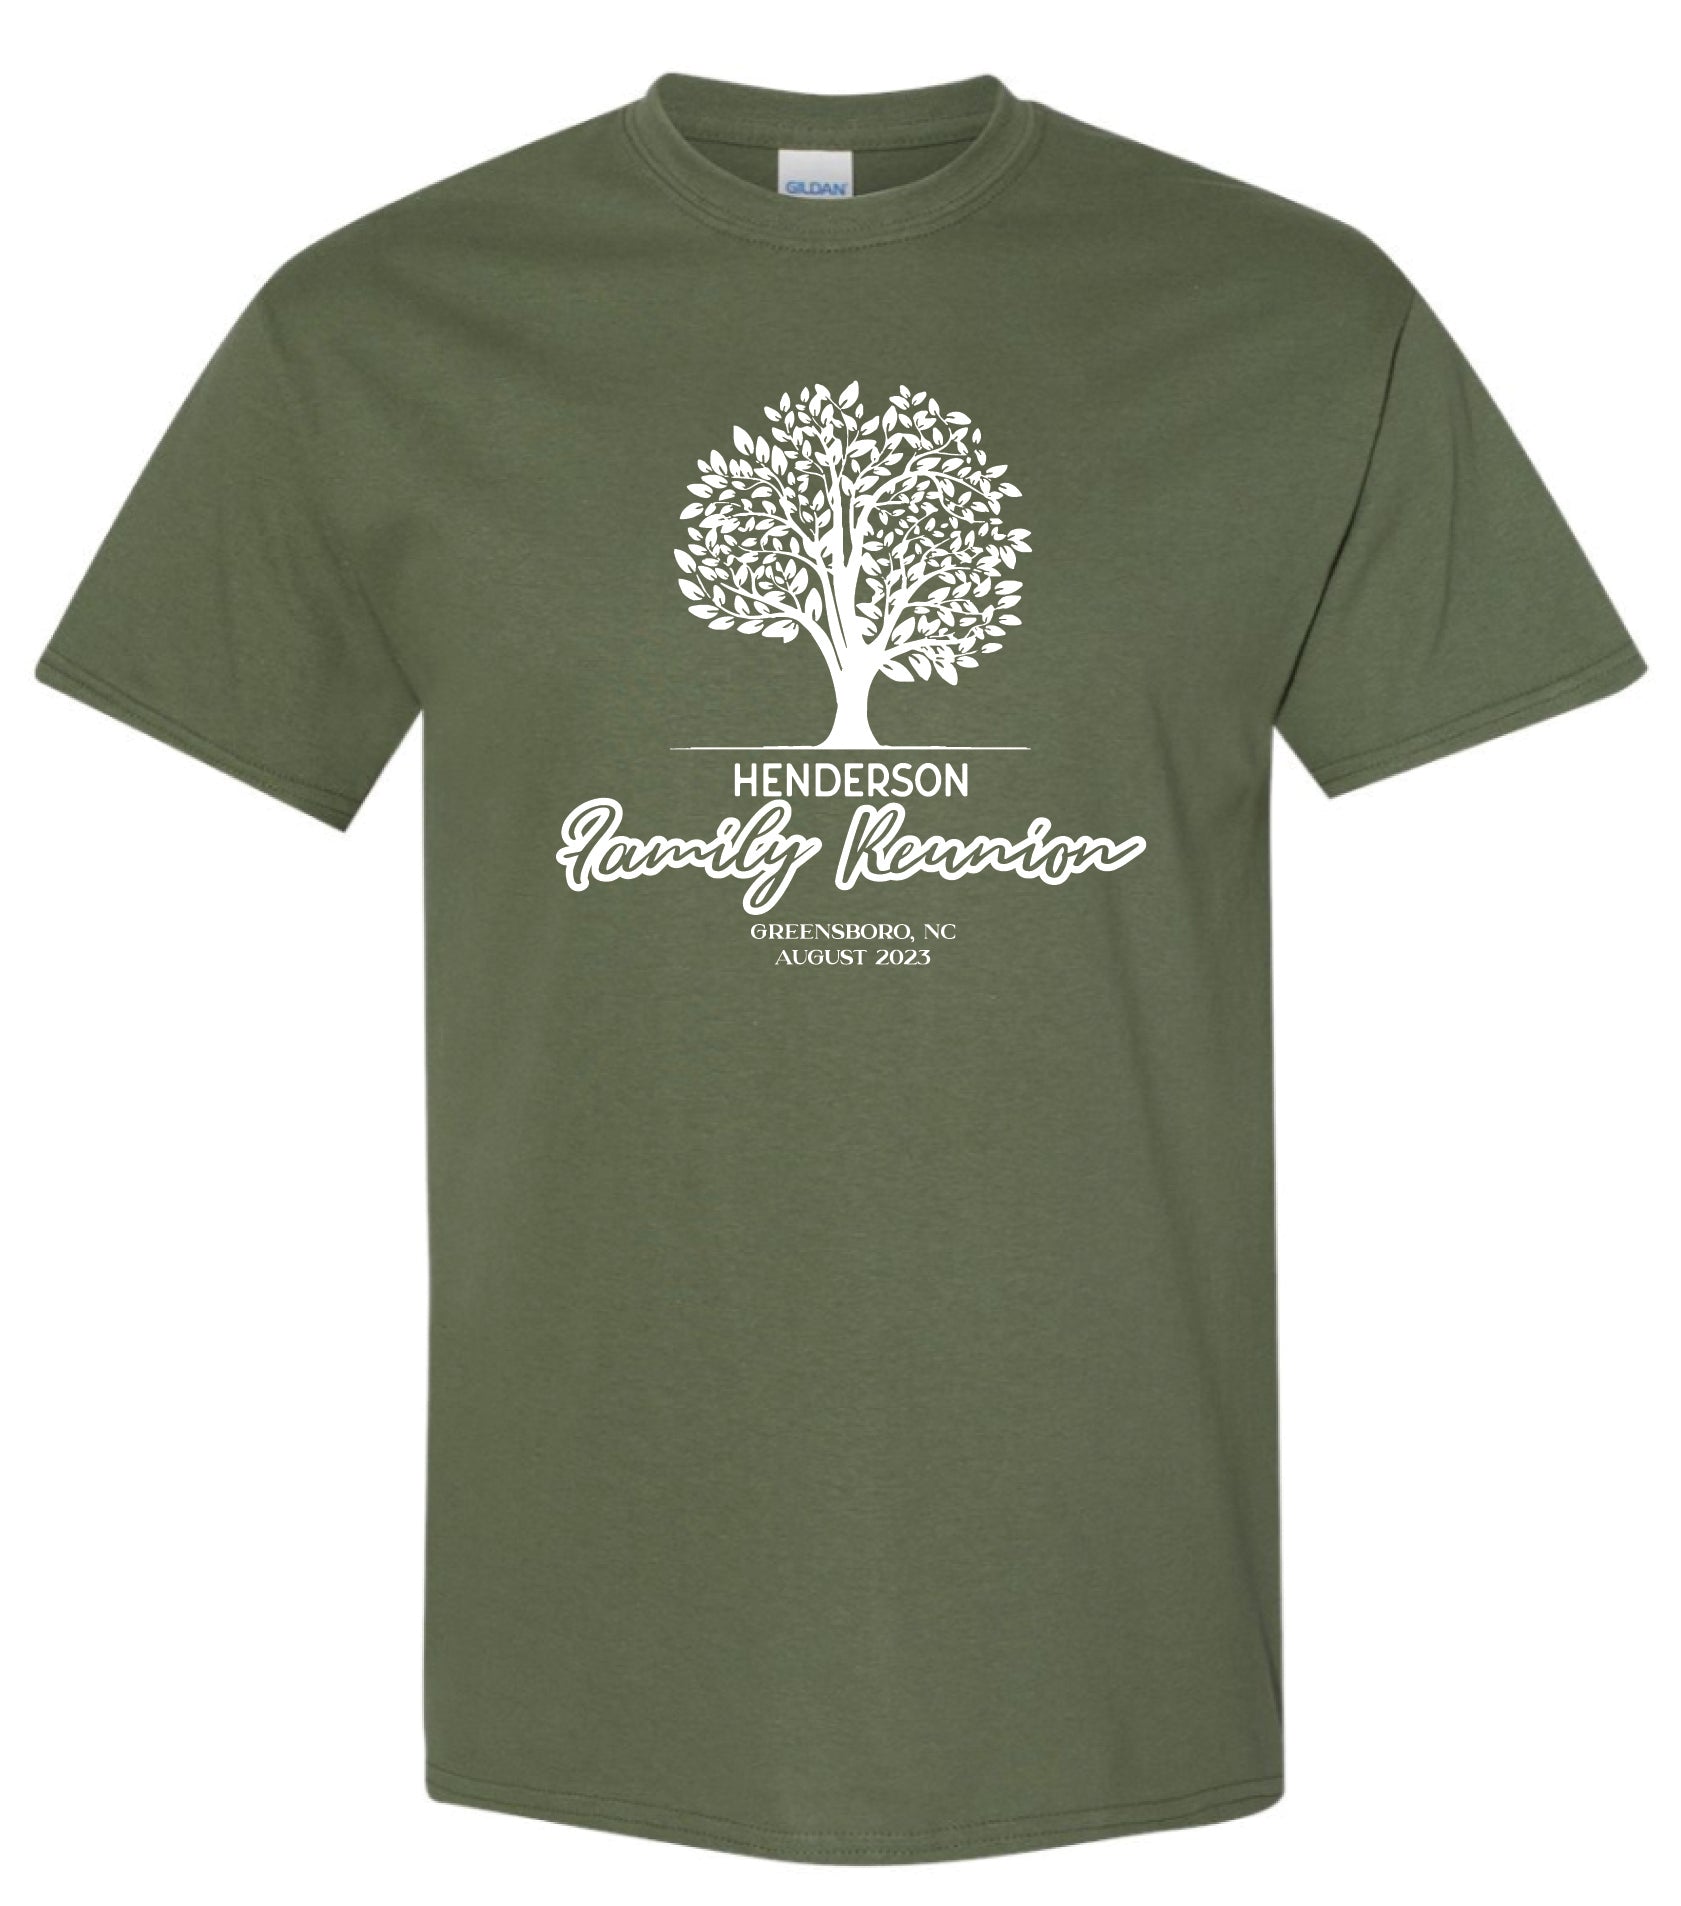 Henderson Family Reunion T-Shirt - Adult Unisex and Youth